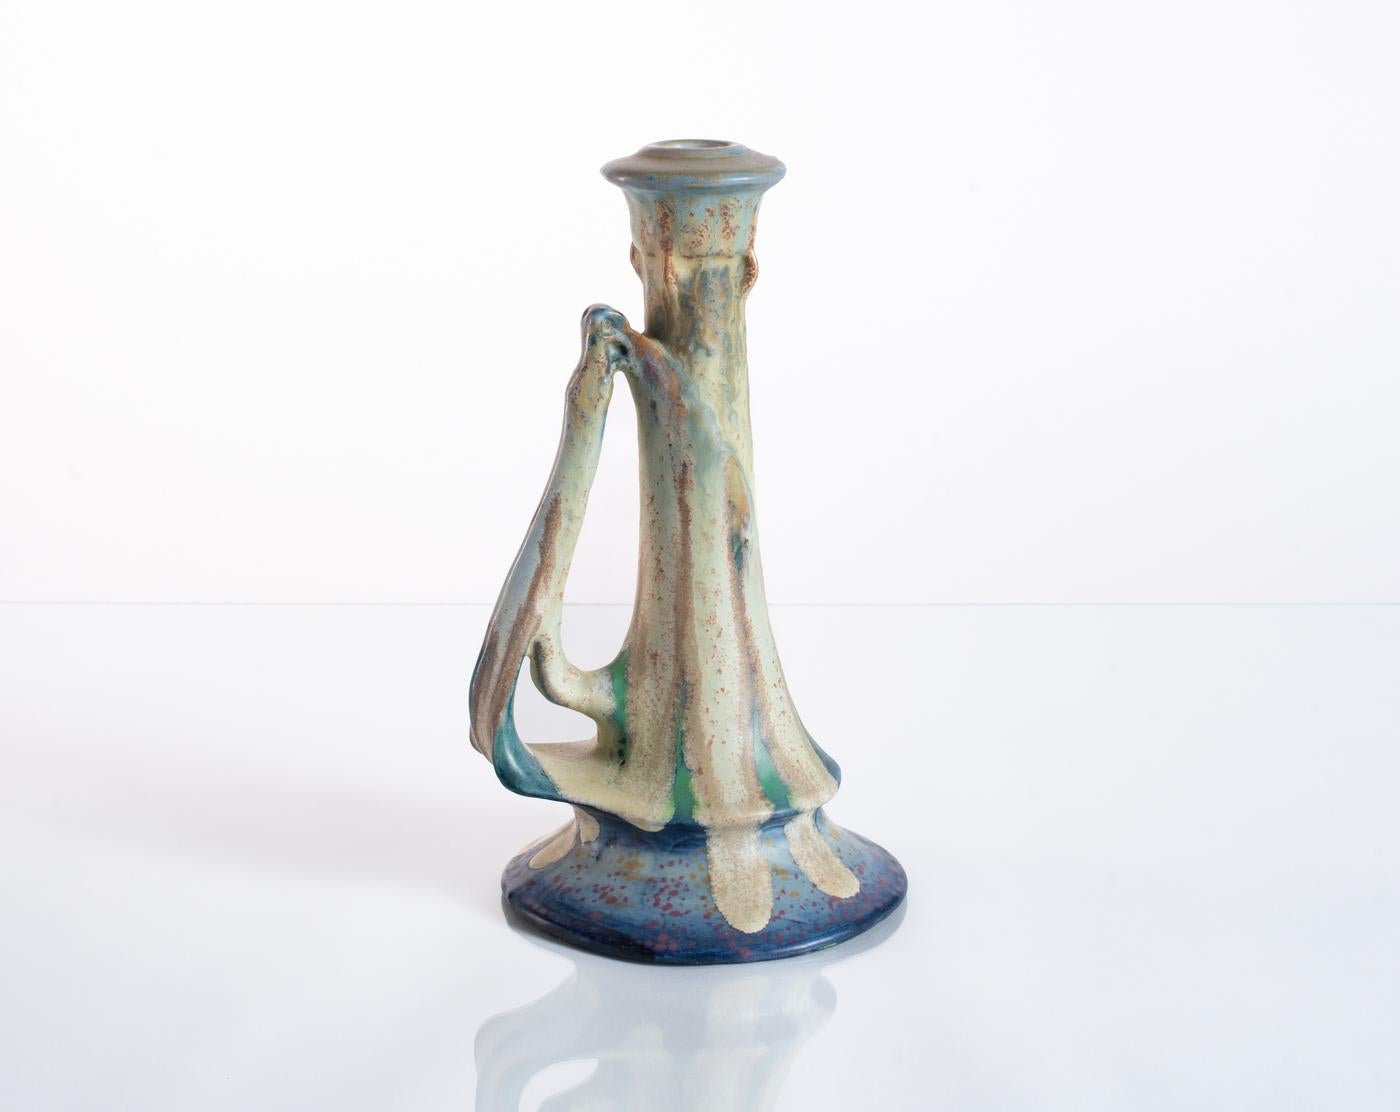 Biomorphic candlestick with experimental glaze produced by RStk Amphora c. 1900, a design attributed to Paul Dachsel. Hand-signed in the base with an RStK marking indicating that this piece was hand-finished on the potter's wheel. 

Riessner,